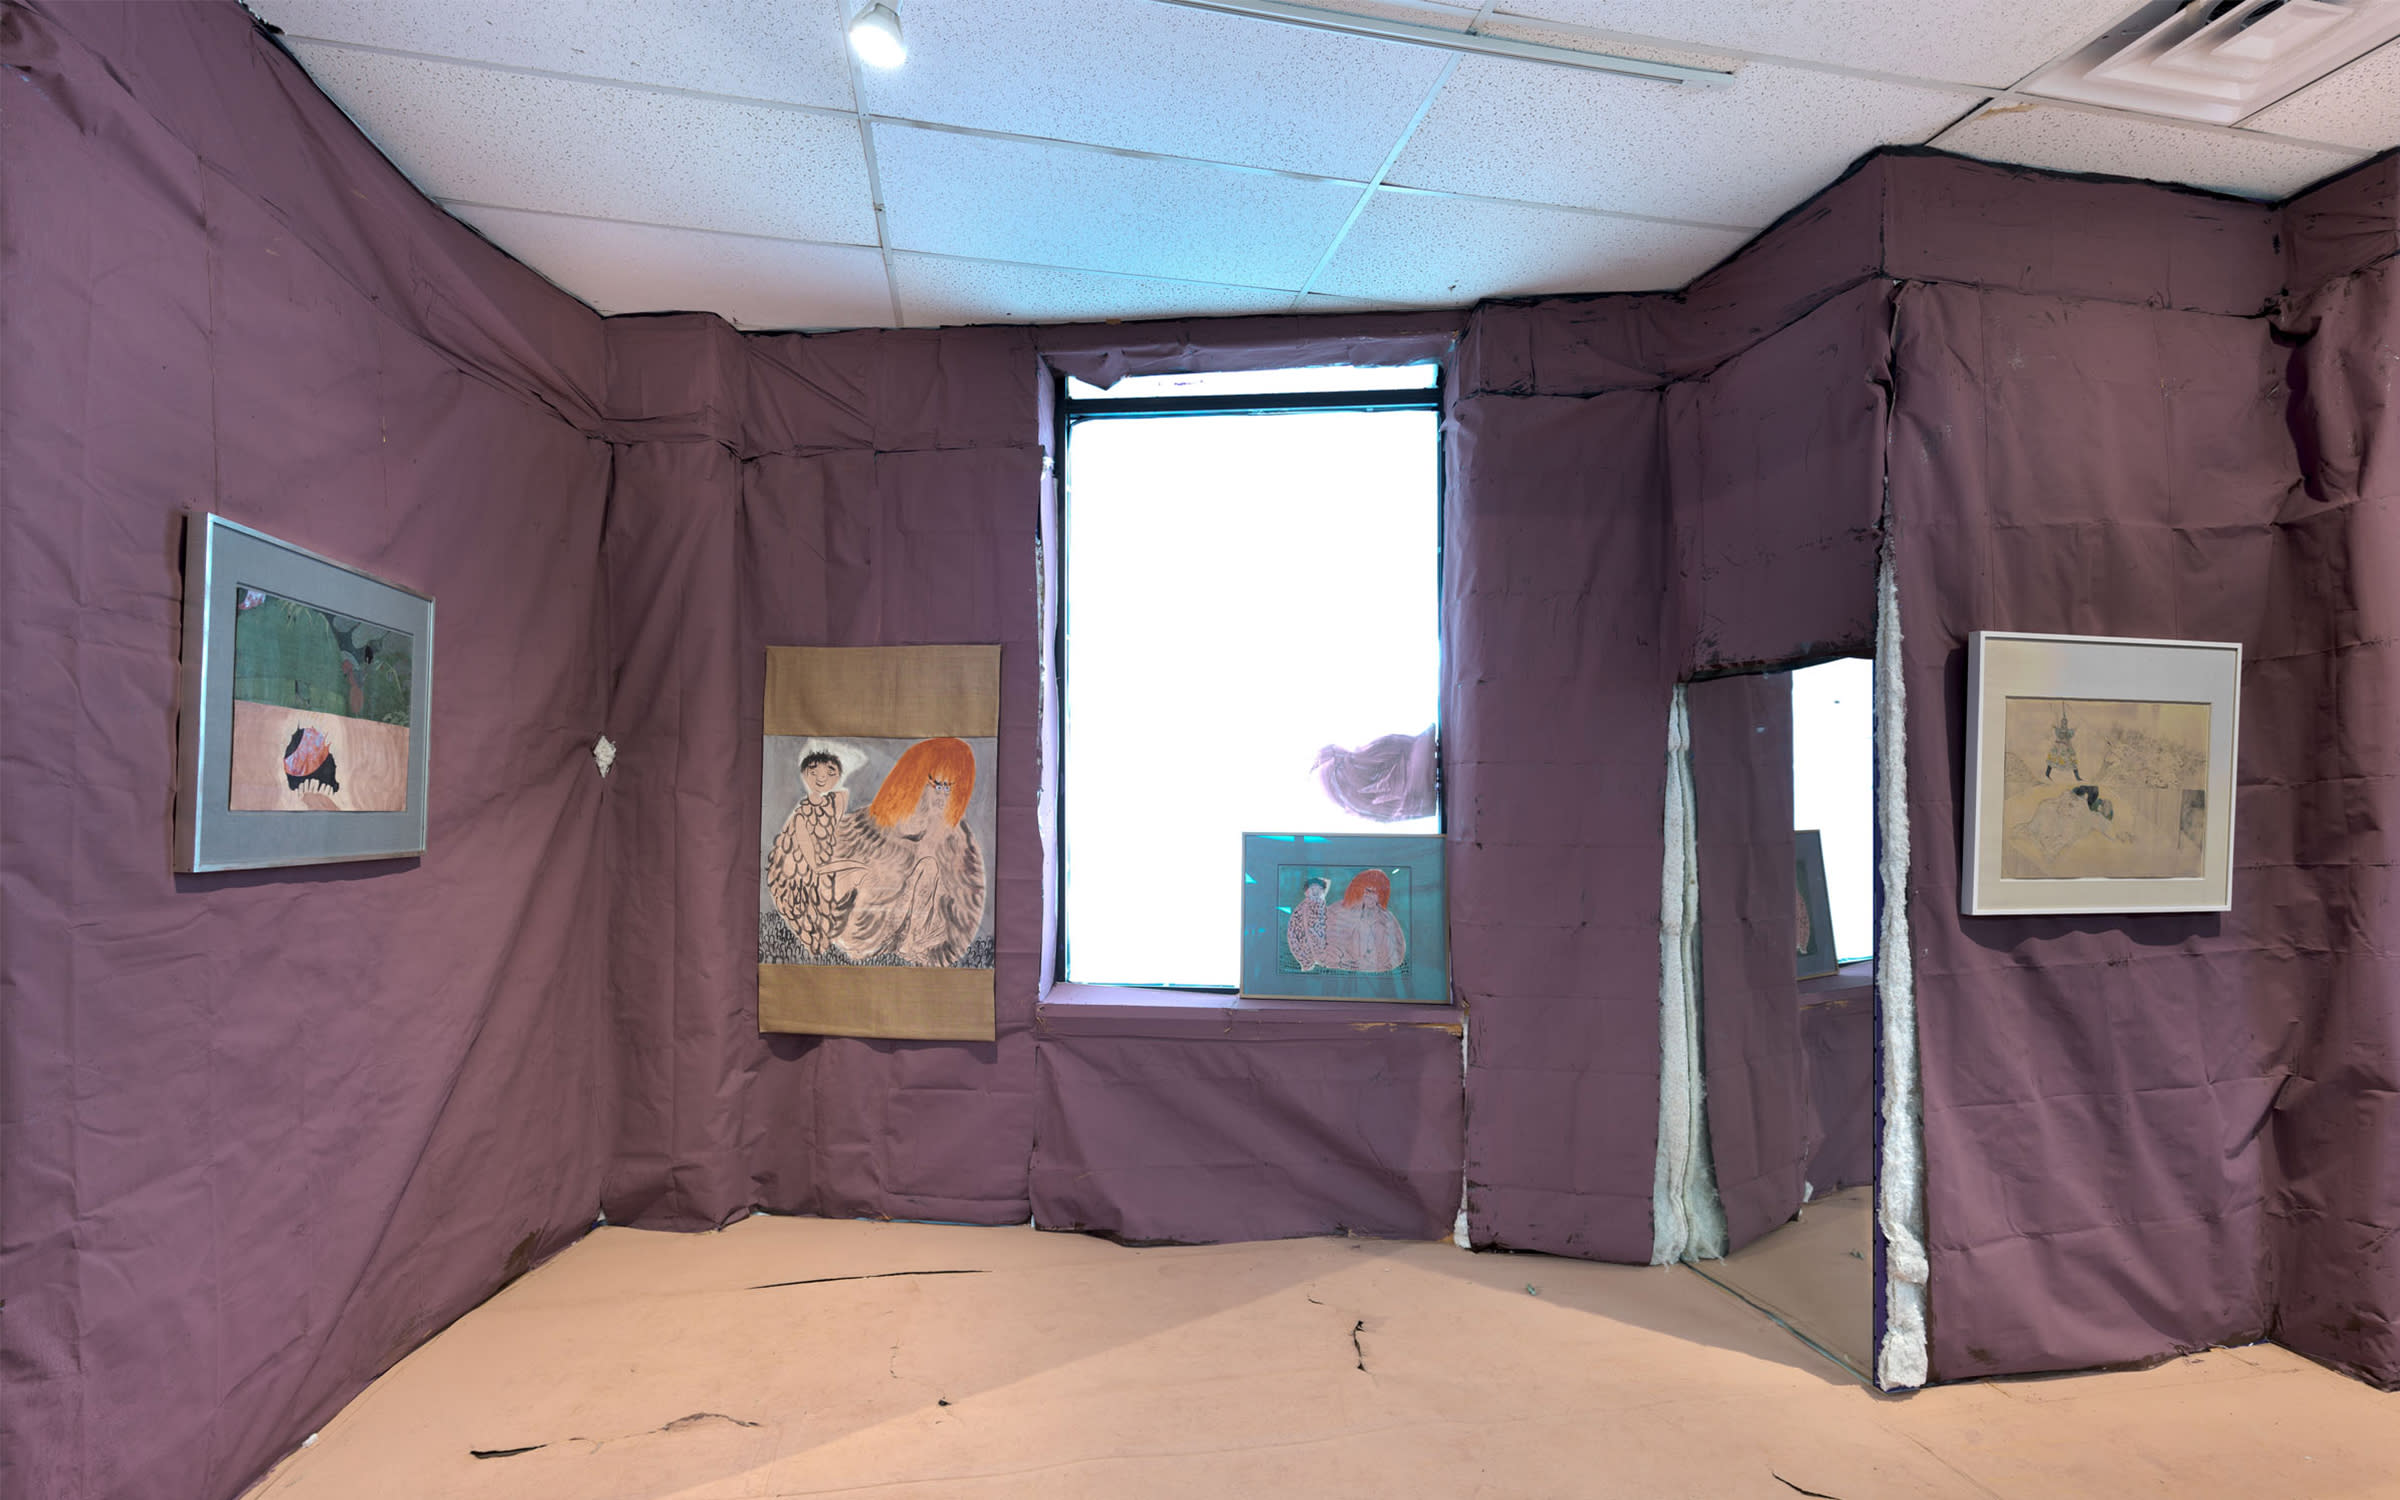 Installation view of Kai Althoff's exhibition 'Häuptling Klapperndes Geschirr', TRAMPS, New York City, October 2018 - January 2019. Courtesy of Gladstone Gallery, New York City; TRAMPS, New York City; and Michael Werner Gallery, New York City and London.